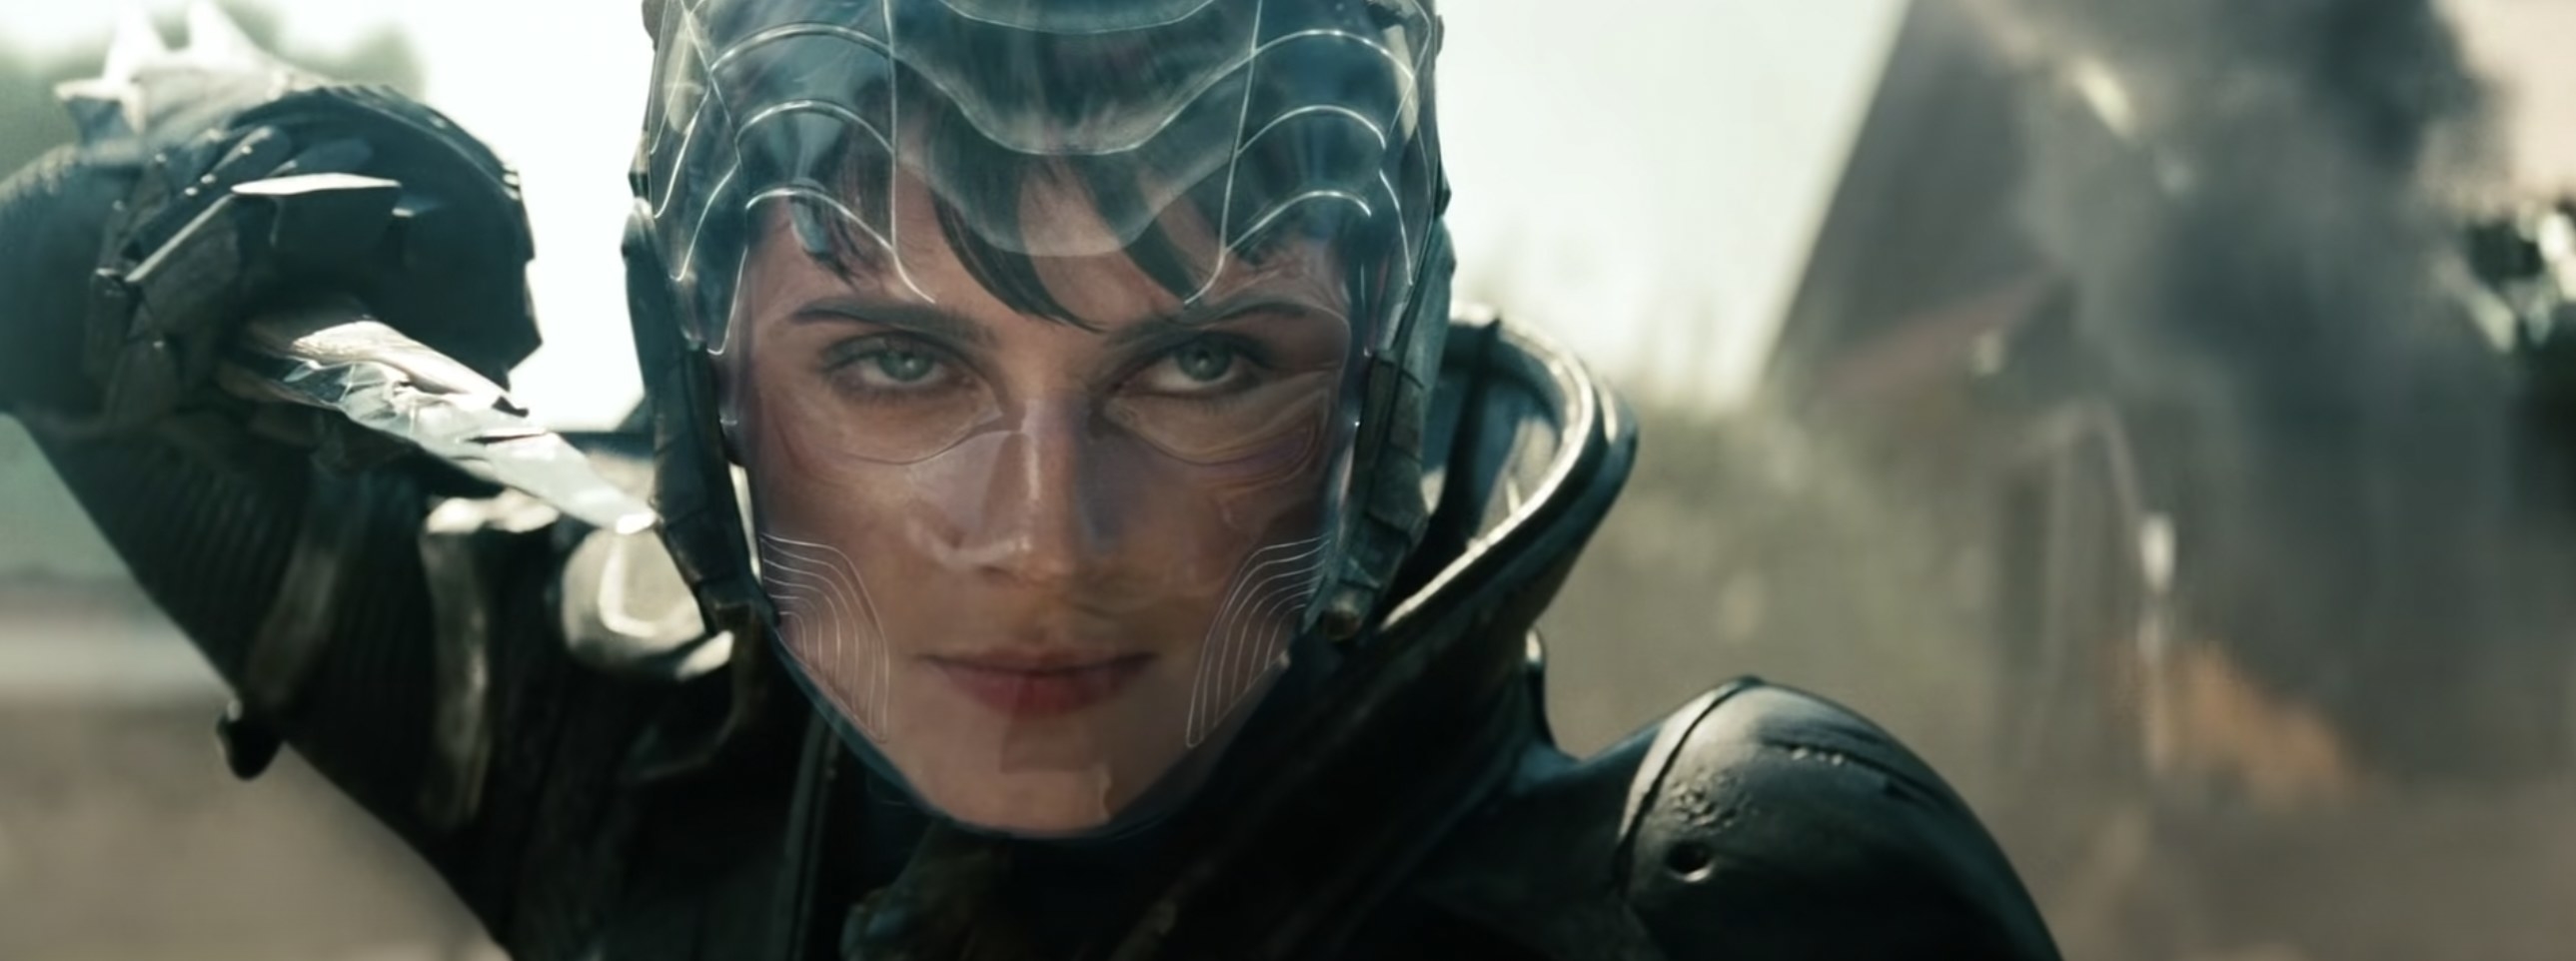 Faora-Ul holds a blade and smiles